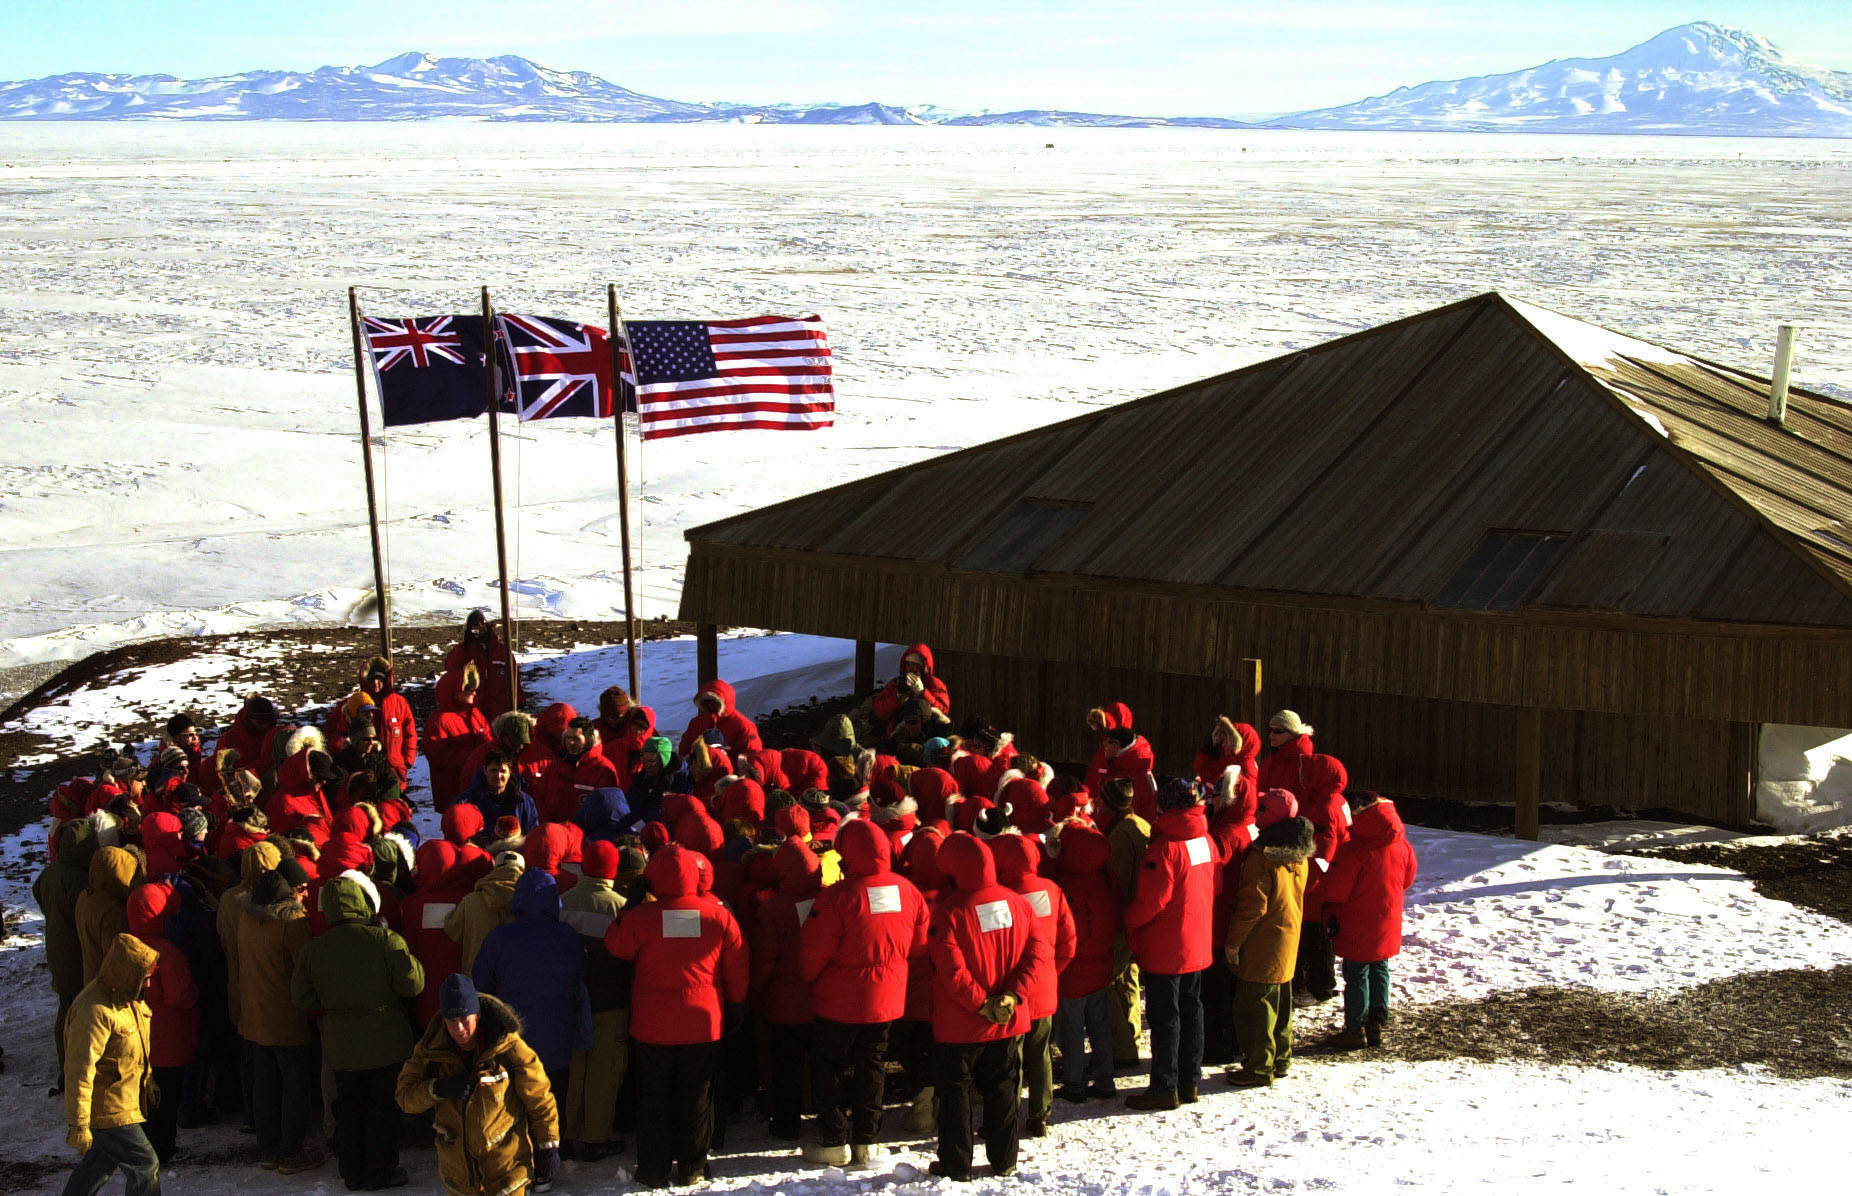 About 30 people in red parkas stand near an old hut during a ceremony.